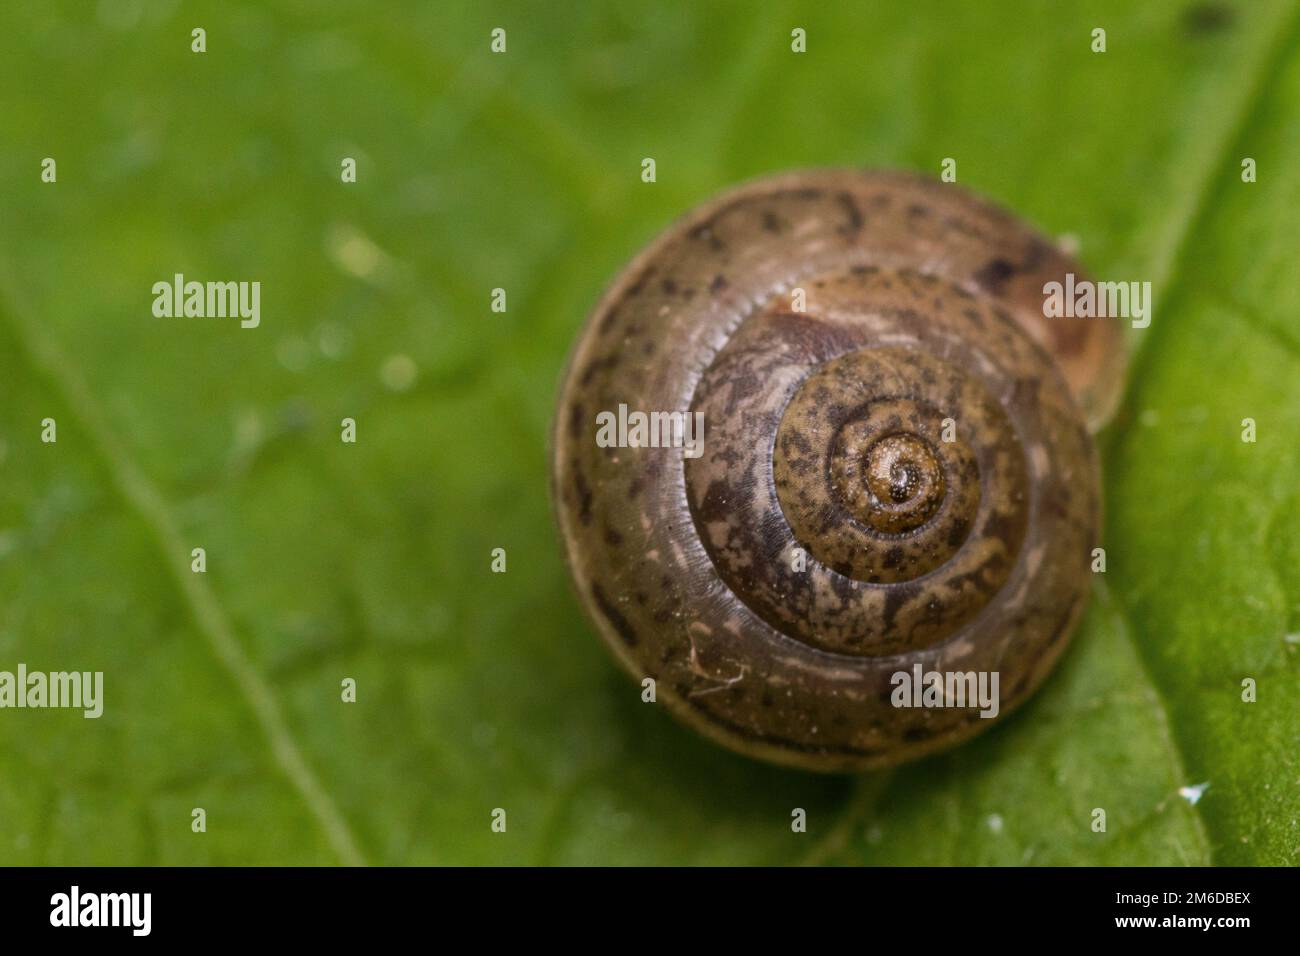 Snail house on green leaf Stock Photo